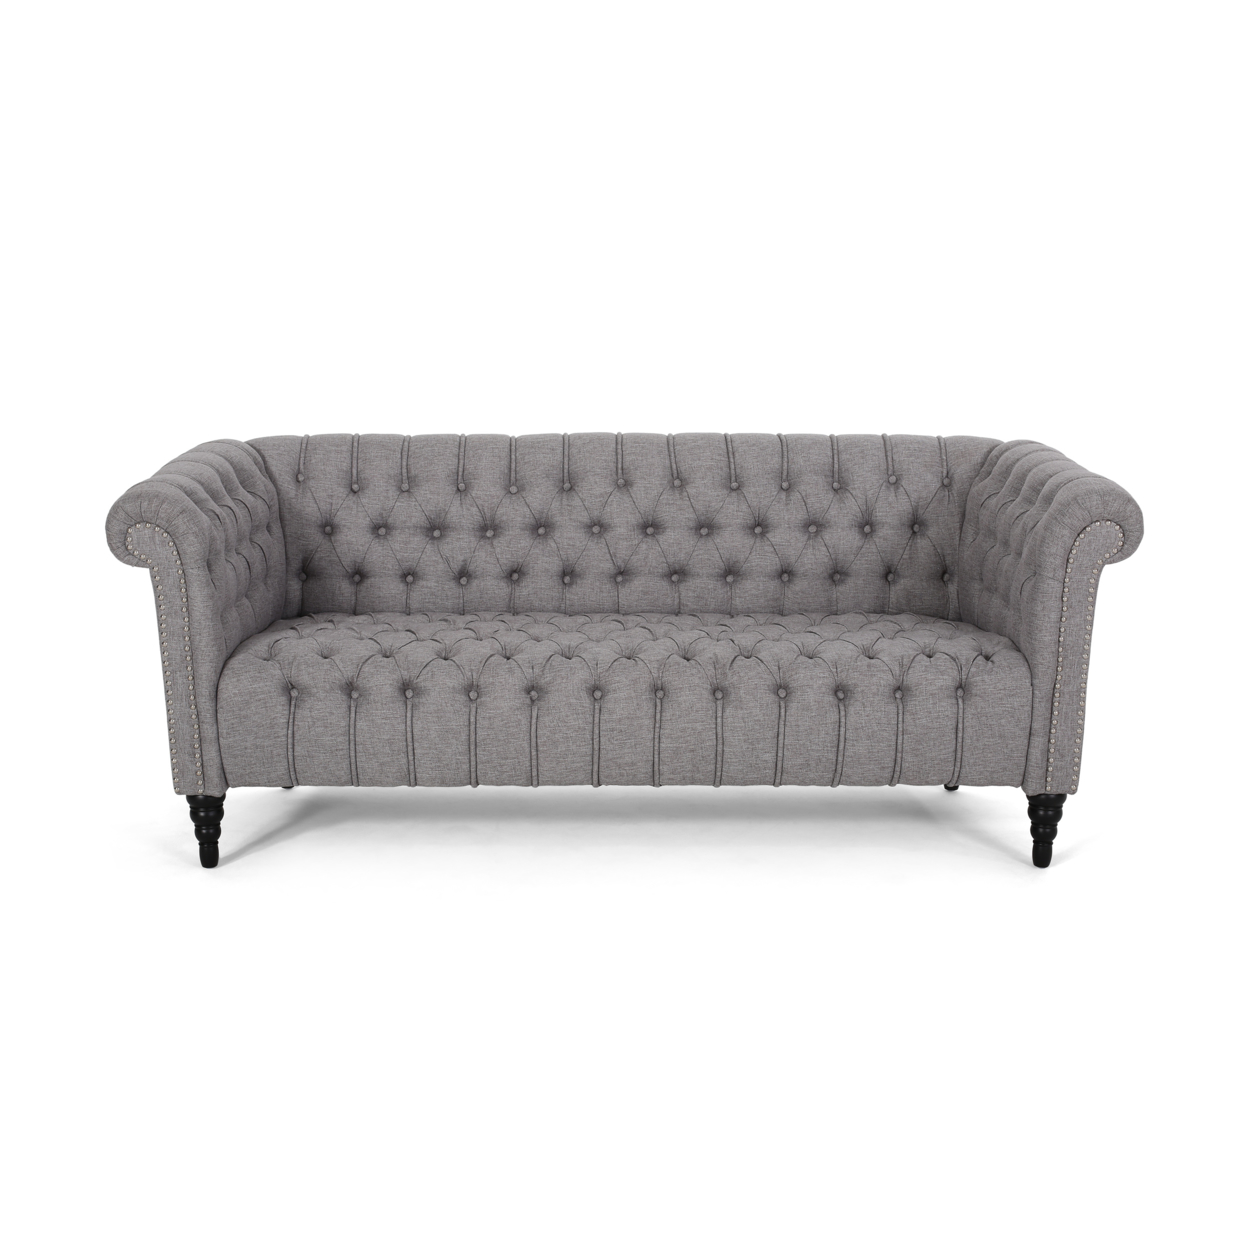 Edgar Traditional Chesterfield Sofa With Tufted Cushions - Gray + Black